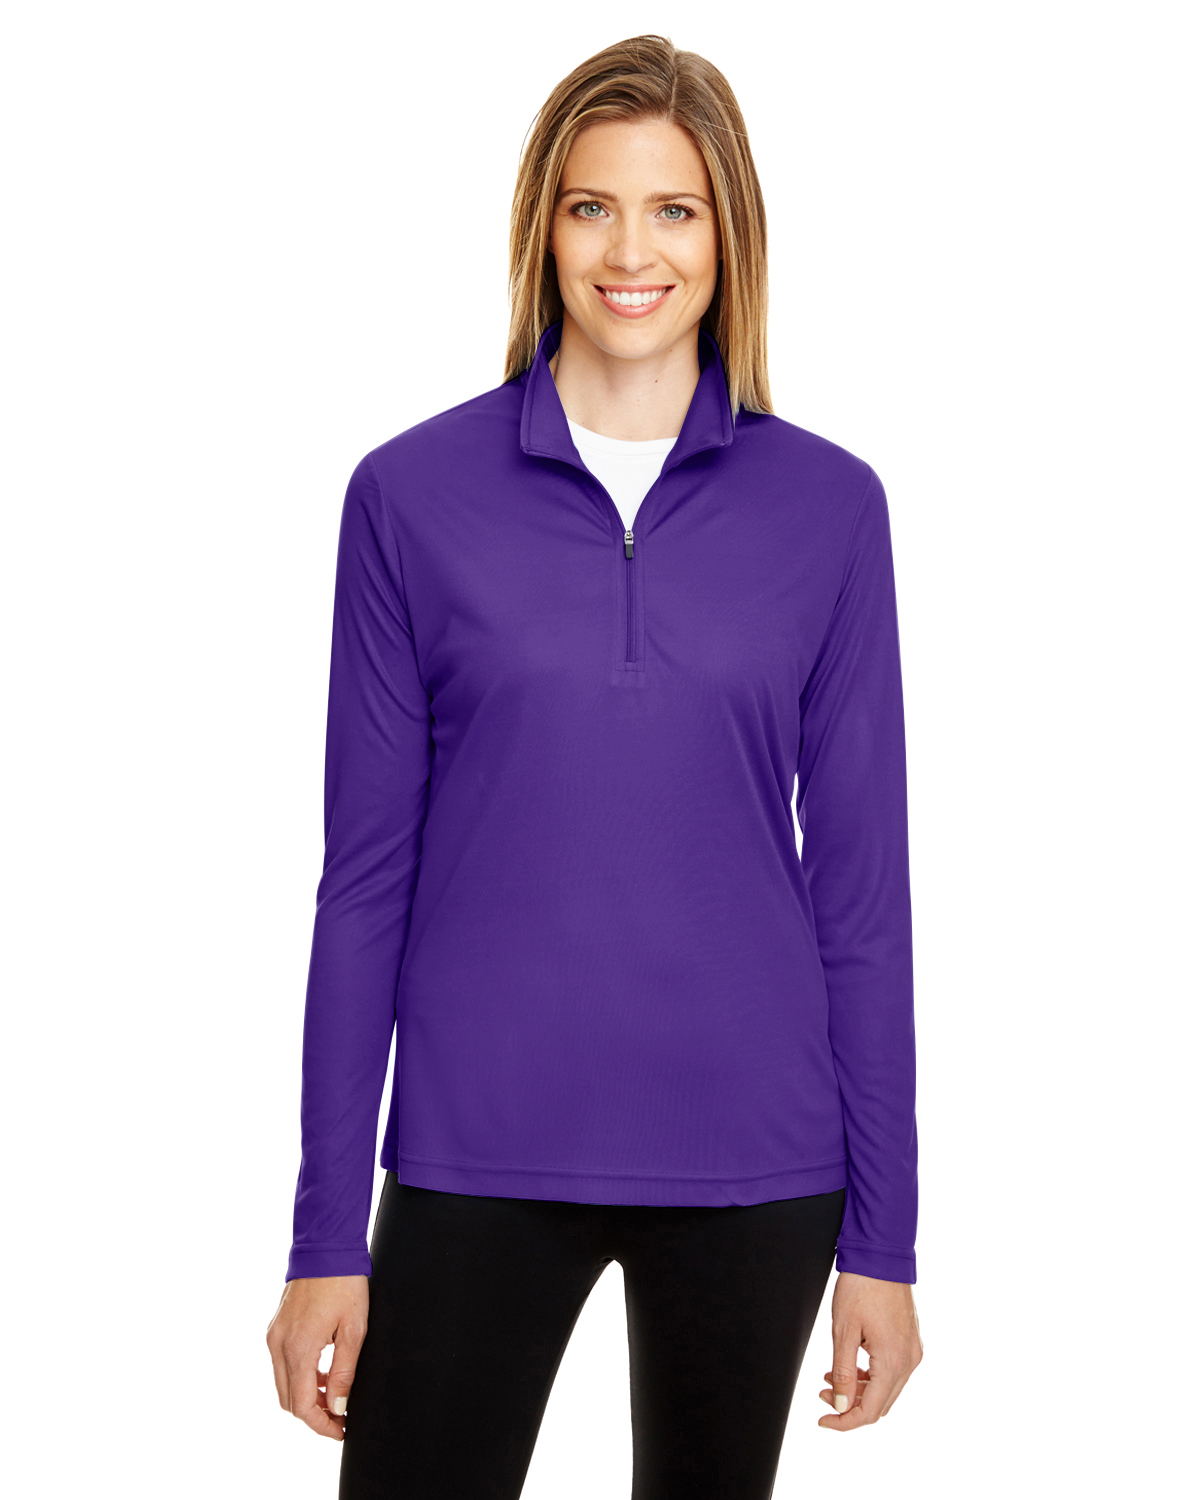 click to view Sport Purple